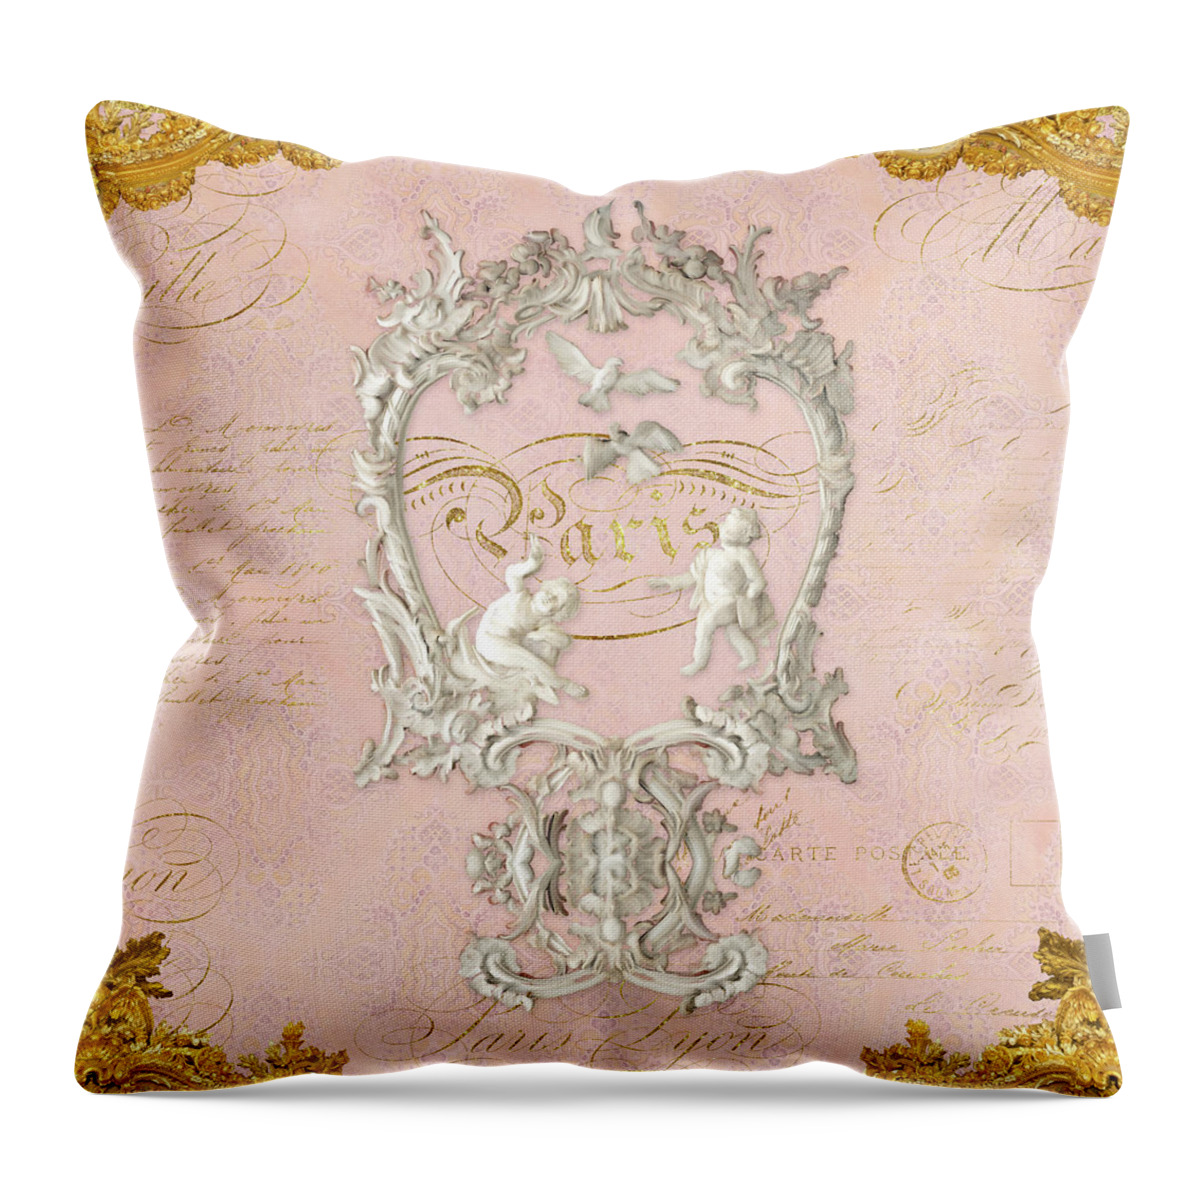 Baroque Throw Pillow featuring the painting Rococo Versailles Palace 1 Baroque Plaster Vintage by Audrey Jeanne Roberts